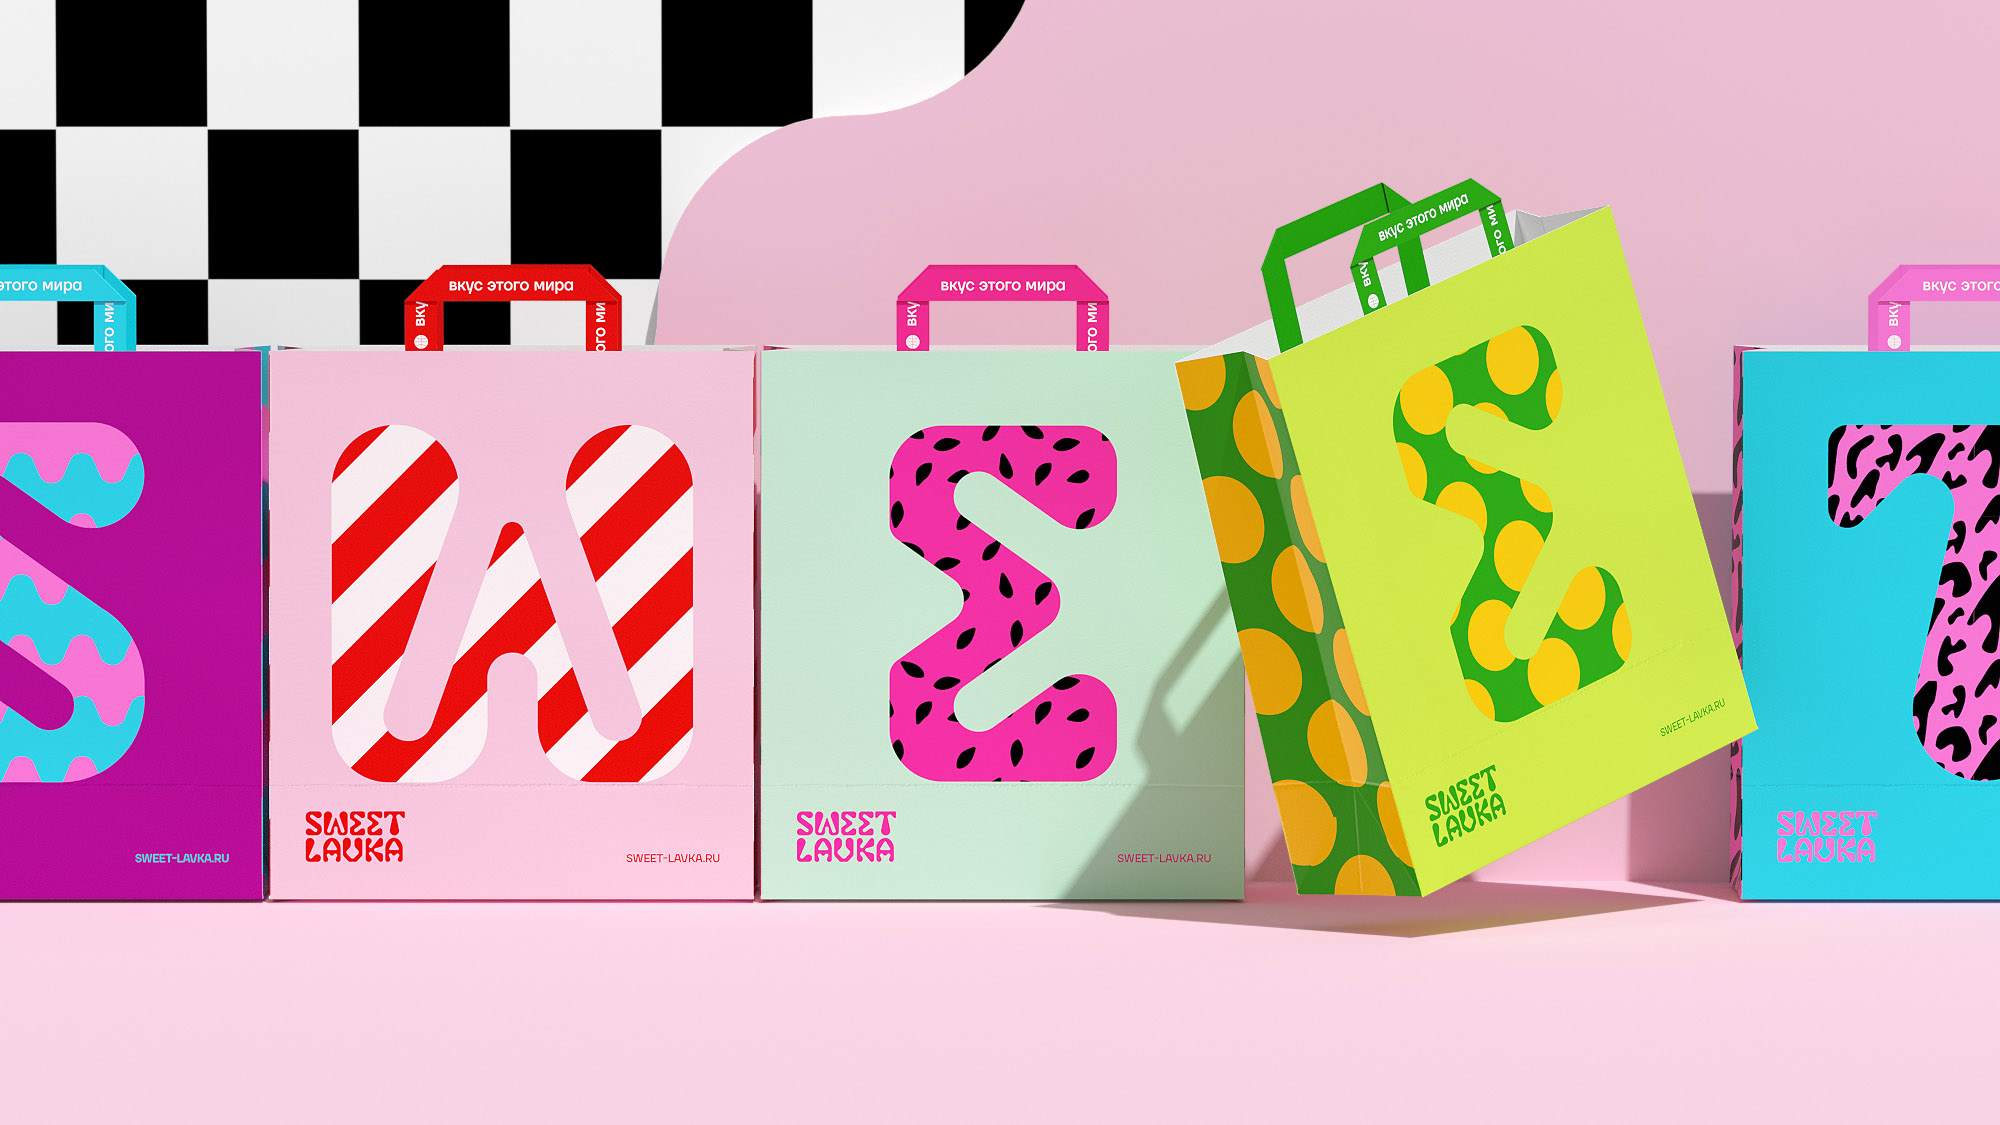 Sasha Kischenko Crafting a Vibrant Identity for Sweet Lavka’s Chain of Stores through Branding and Packaging Design